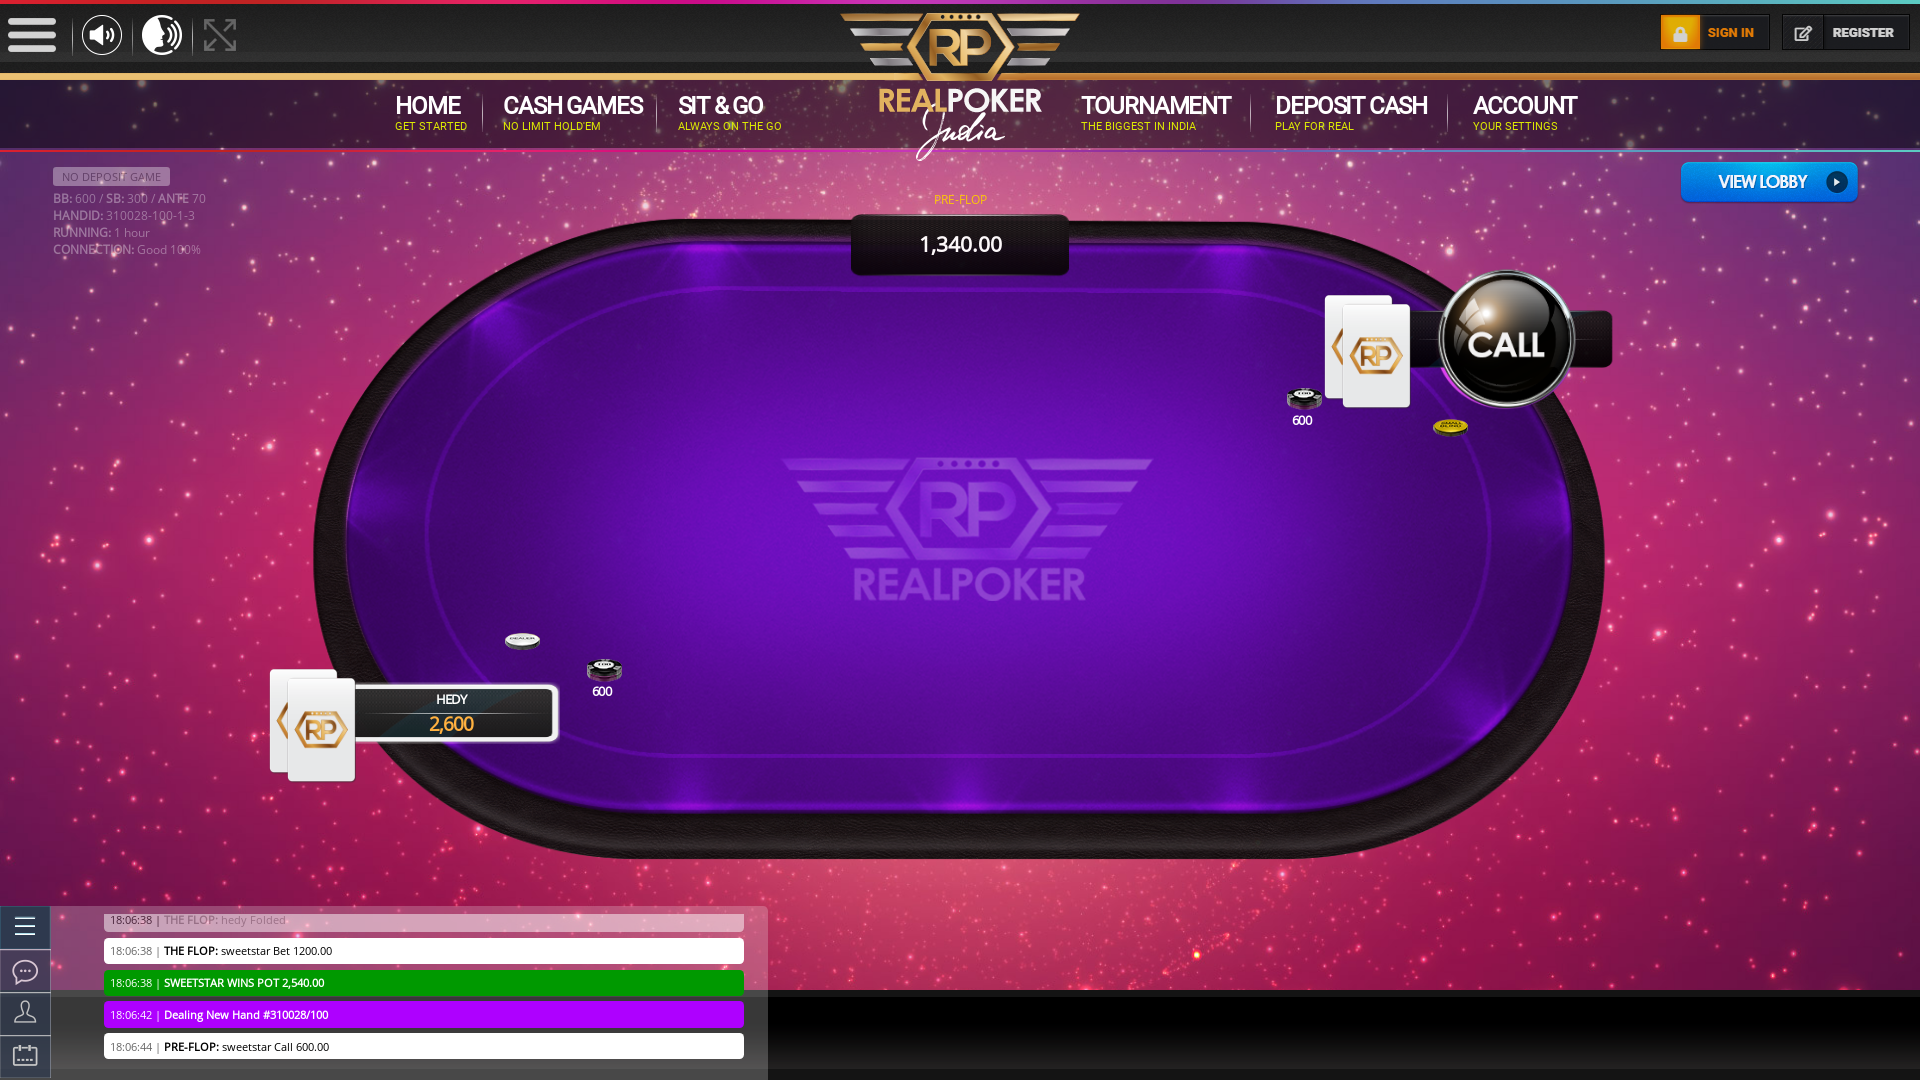 Real poker 10 player table in the 71st minute